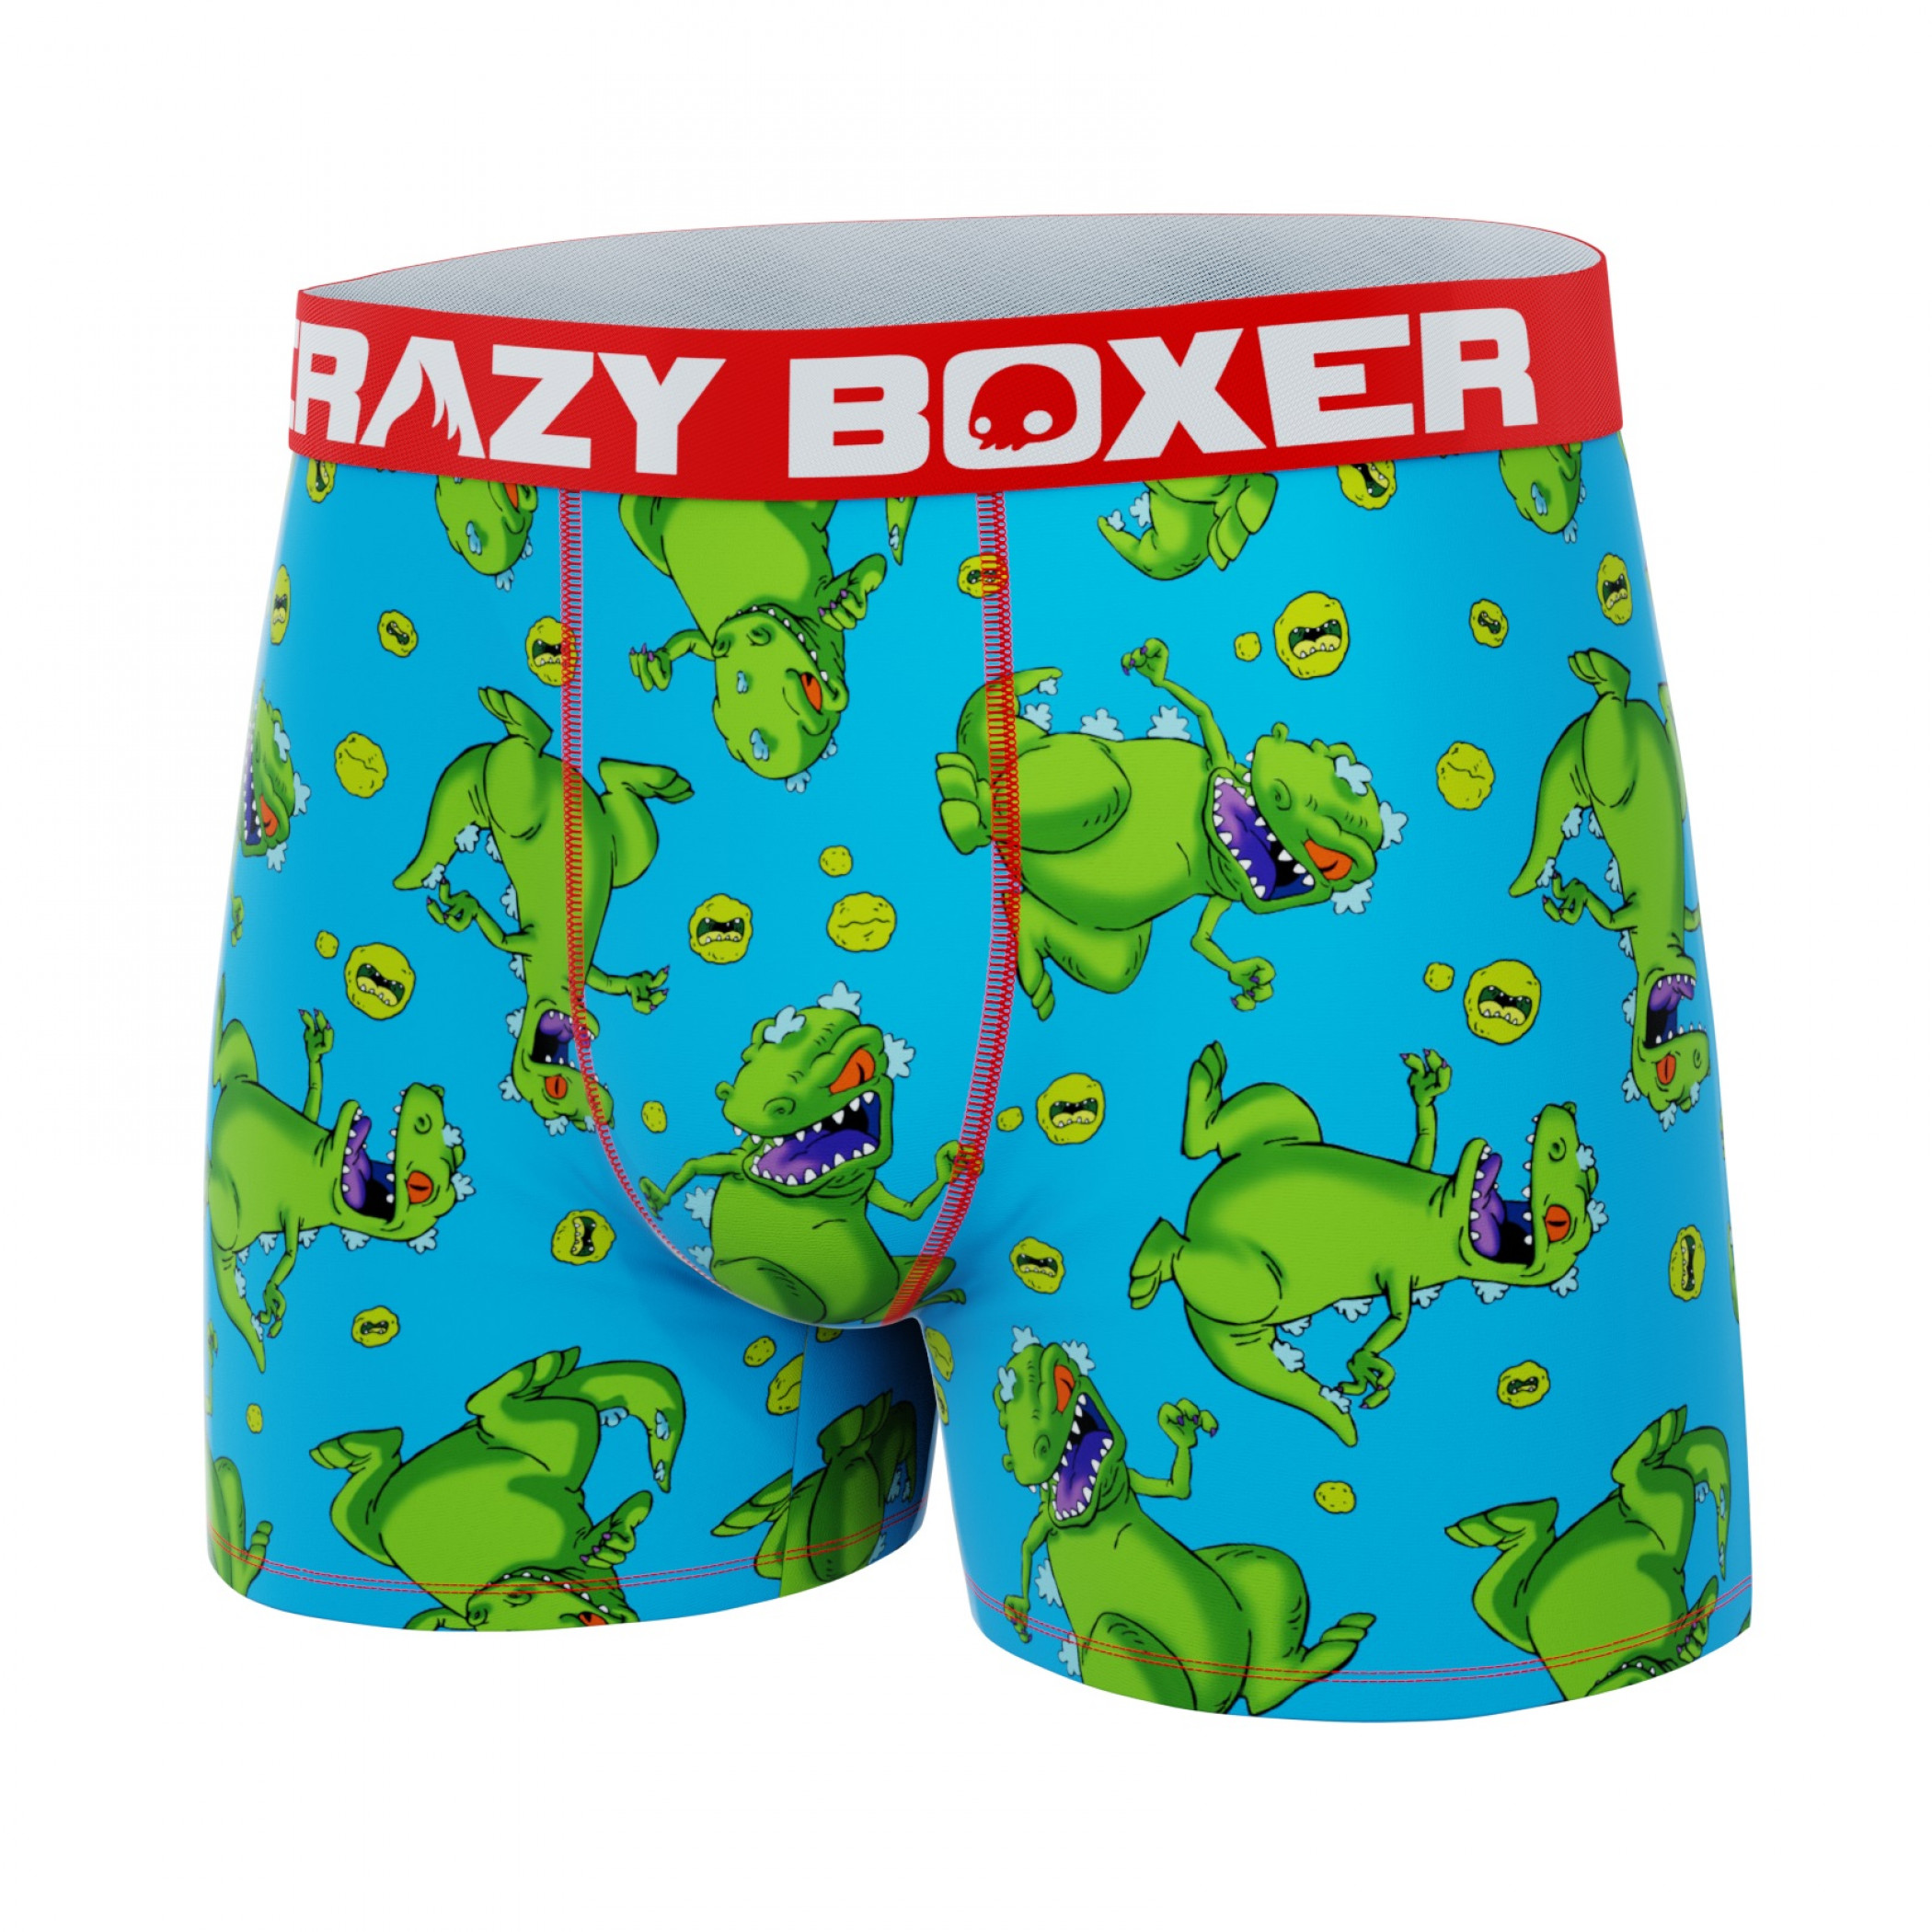 Crazy Boxers Kellogg's Cereal Boxers Variety Boxer Briefs BLACK LARGE